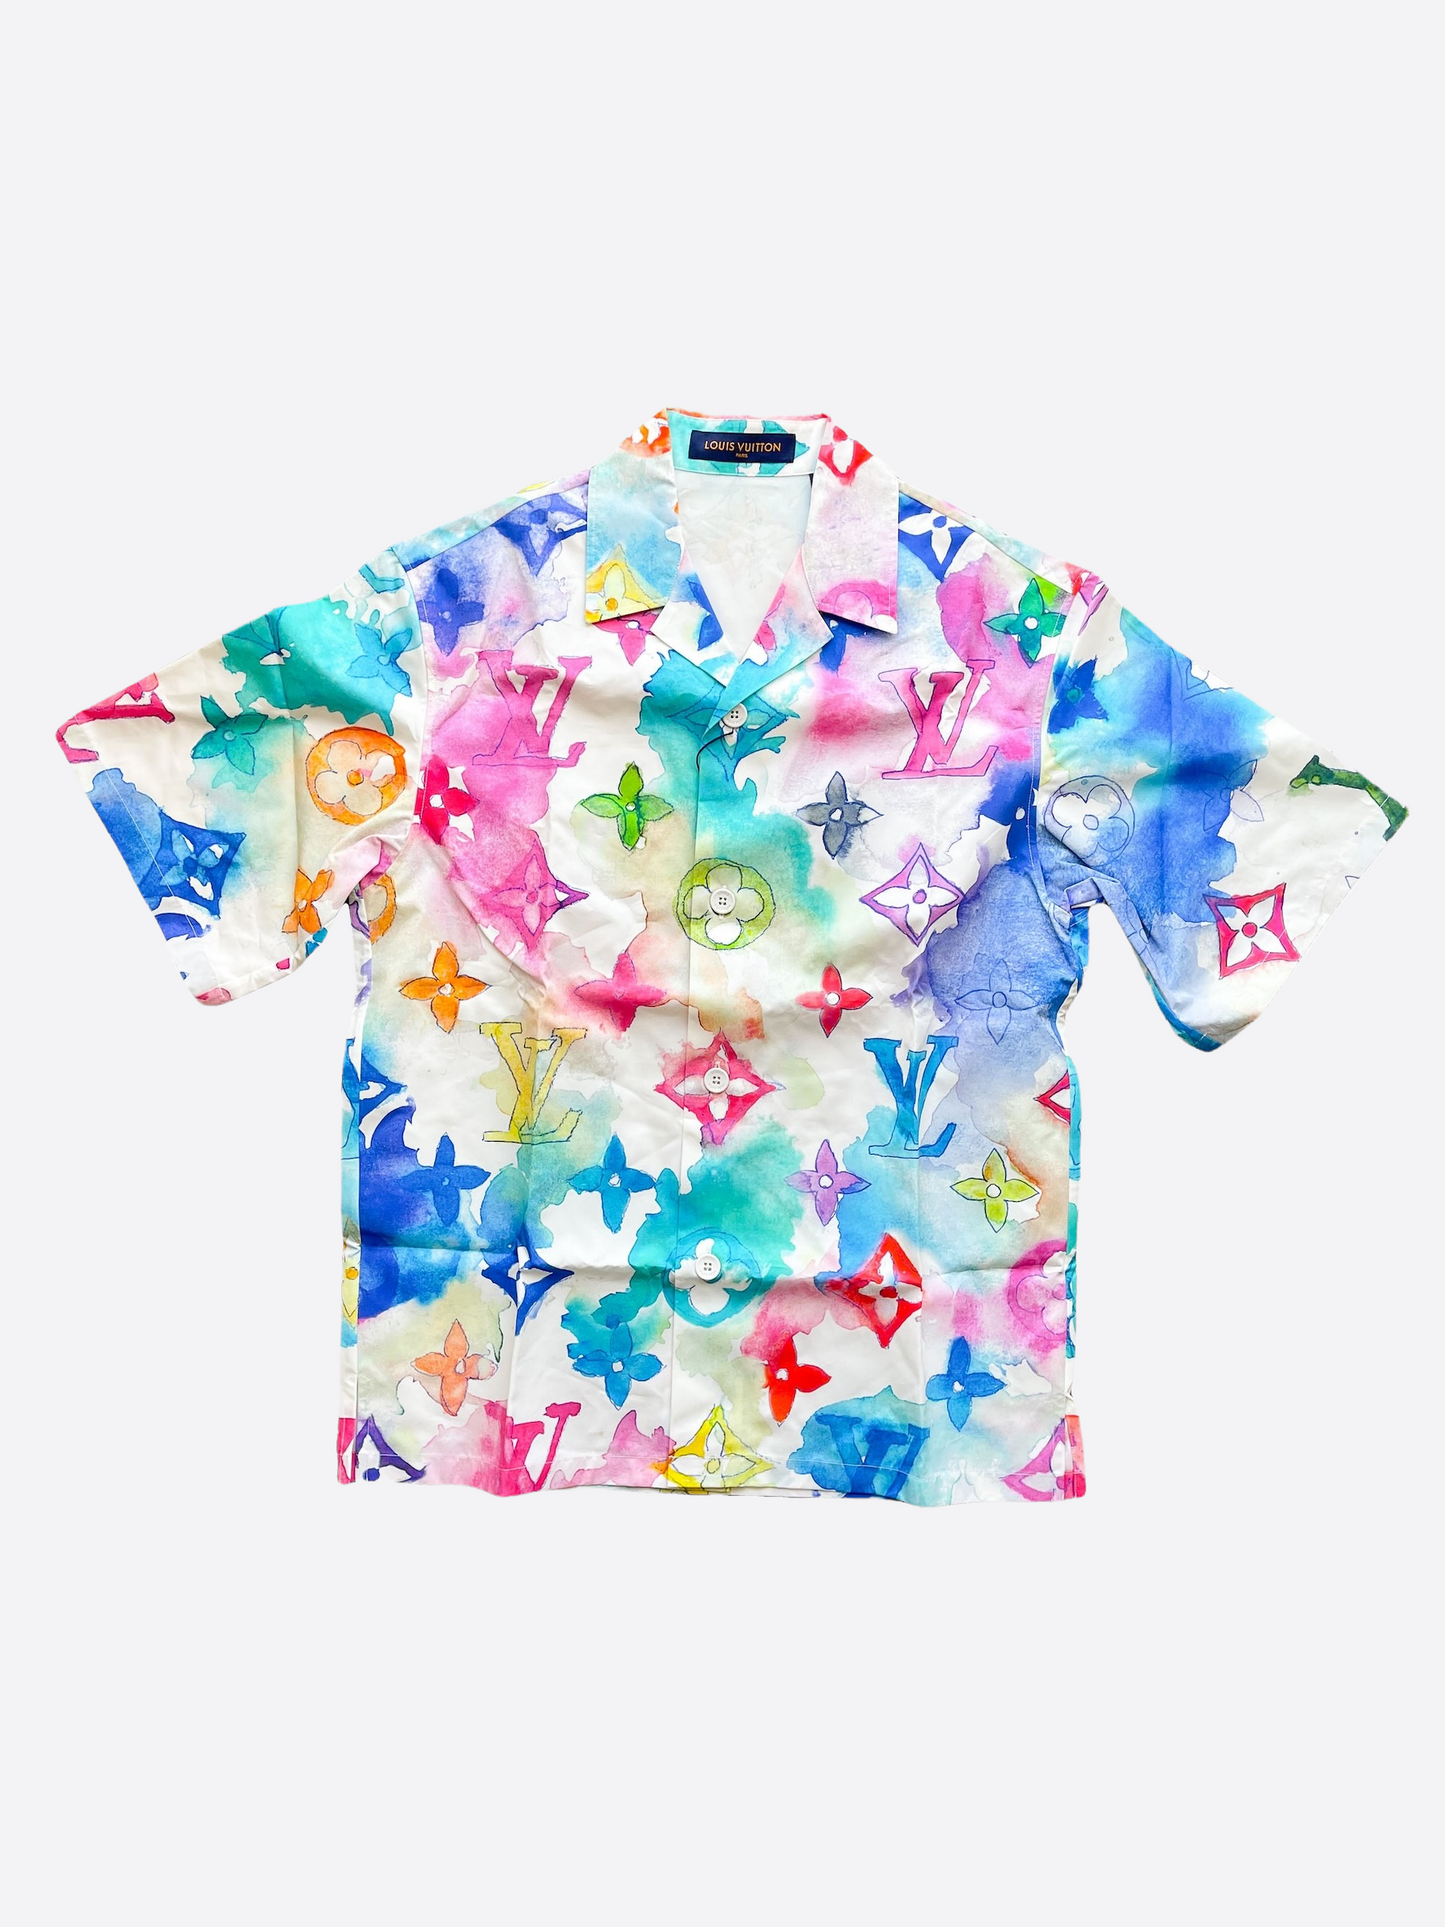 BKPP STYLE on X: #LouisVuitton MULTICOLOR WATERCOLOR SHIRT 32,900